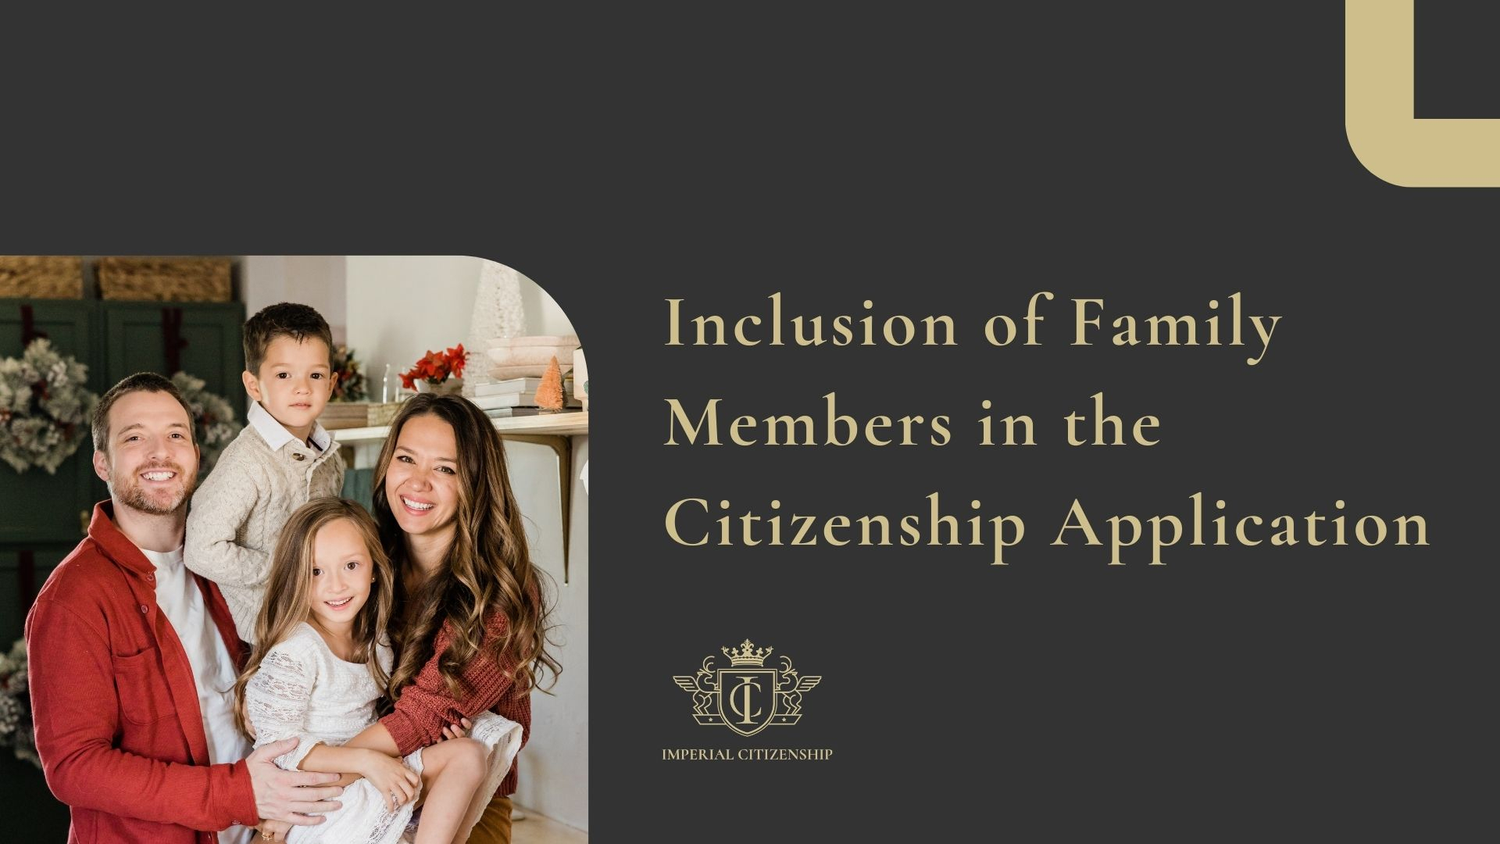 Family members in the Citizenship Application